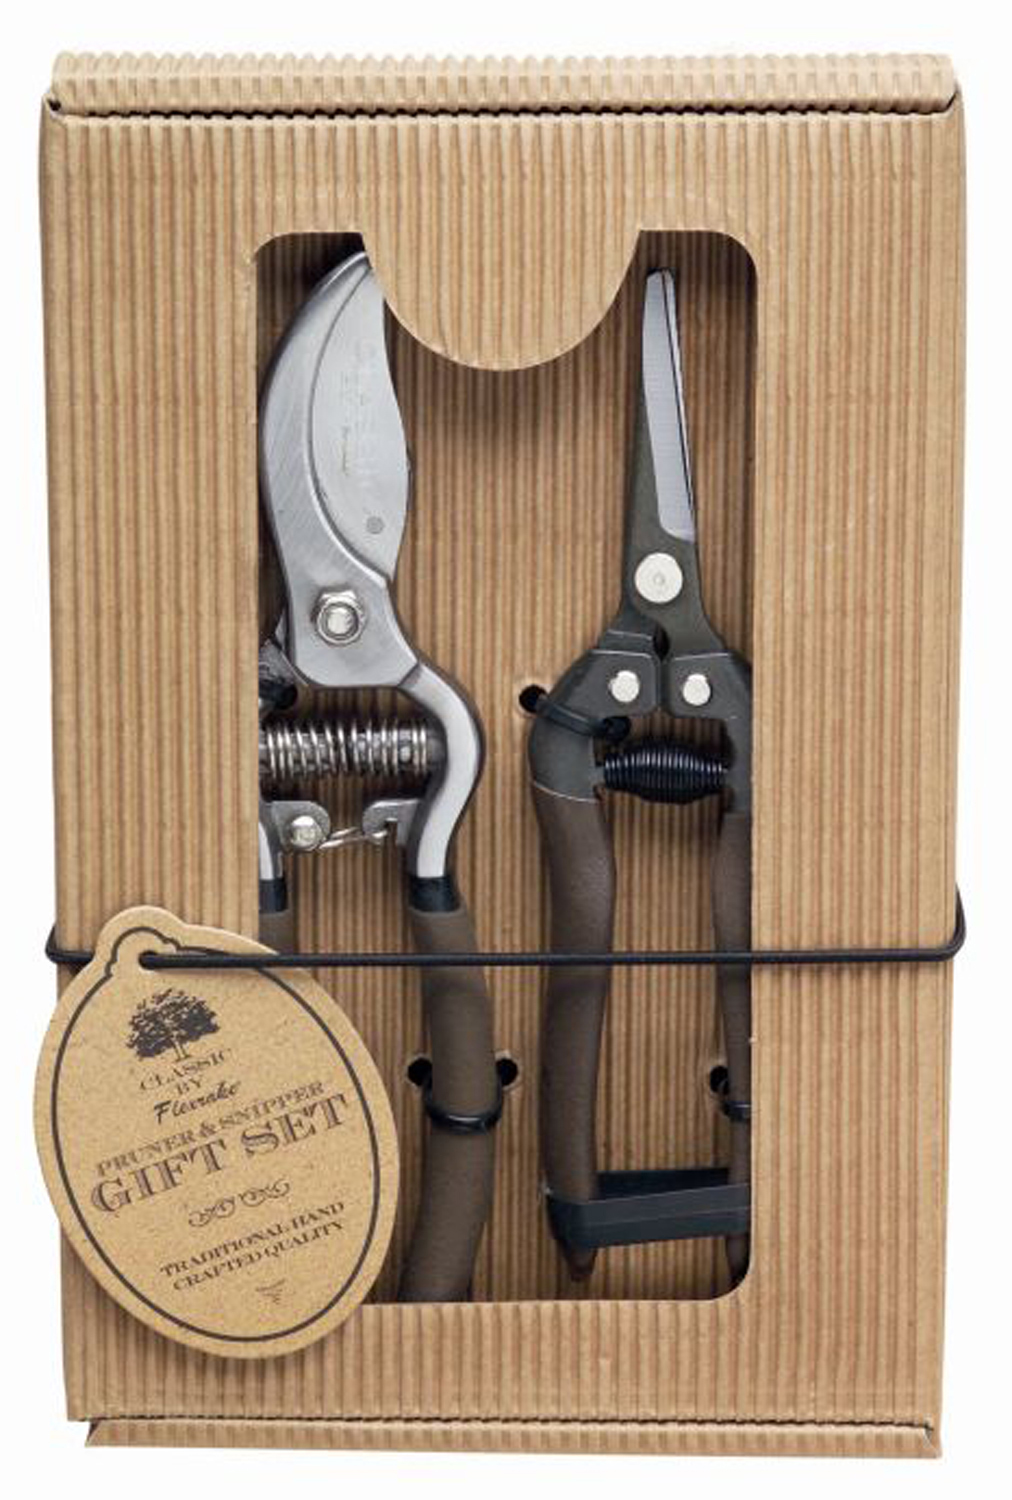 Flexrake CLA347 Classic Bypass Pruner and Sniper Boxed Gift Set - image 1 of 2